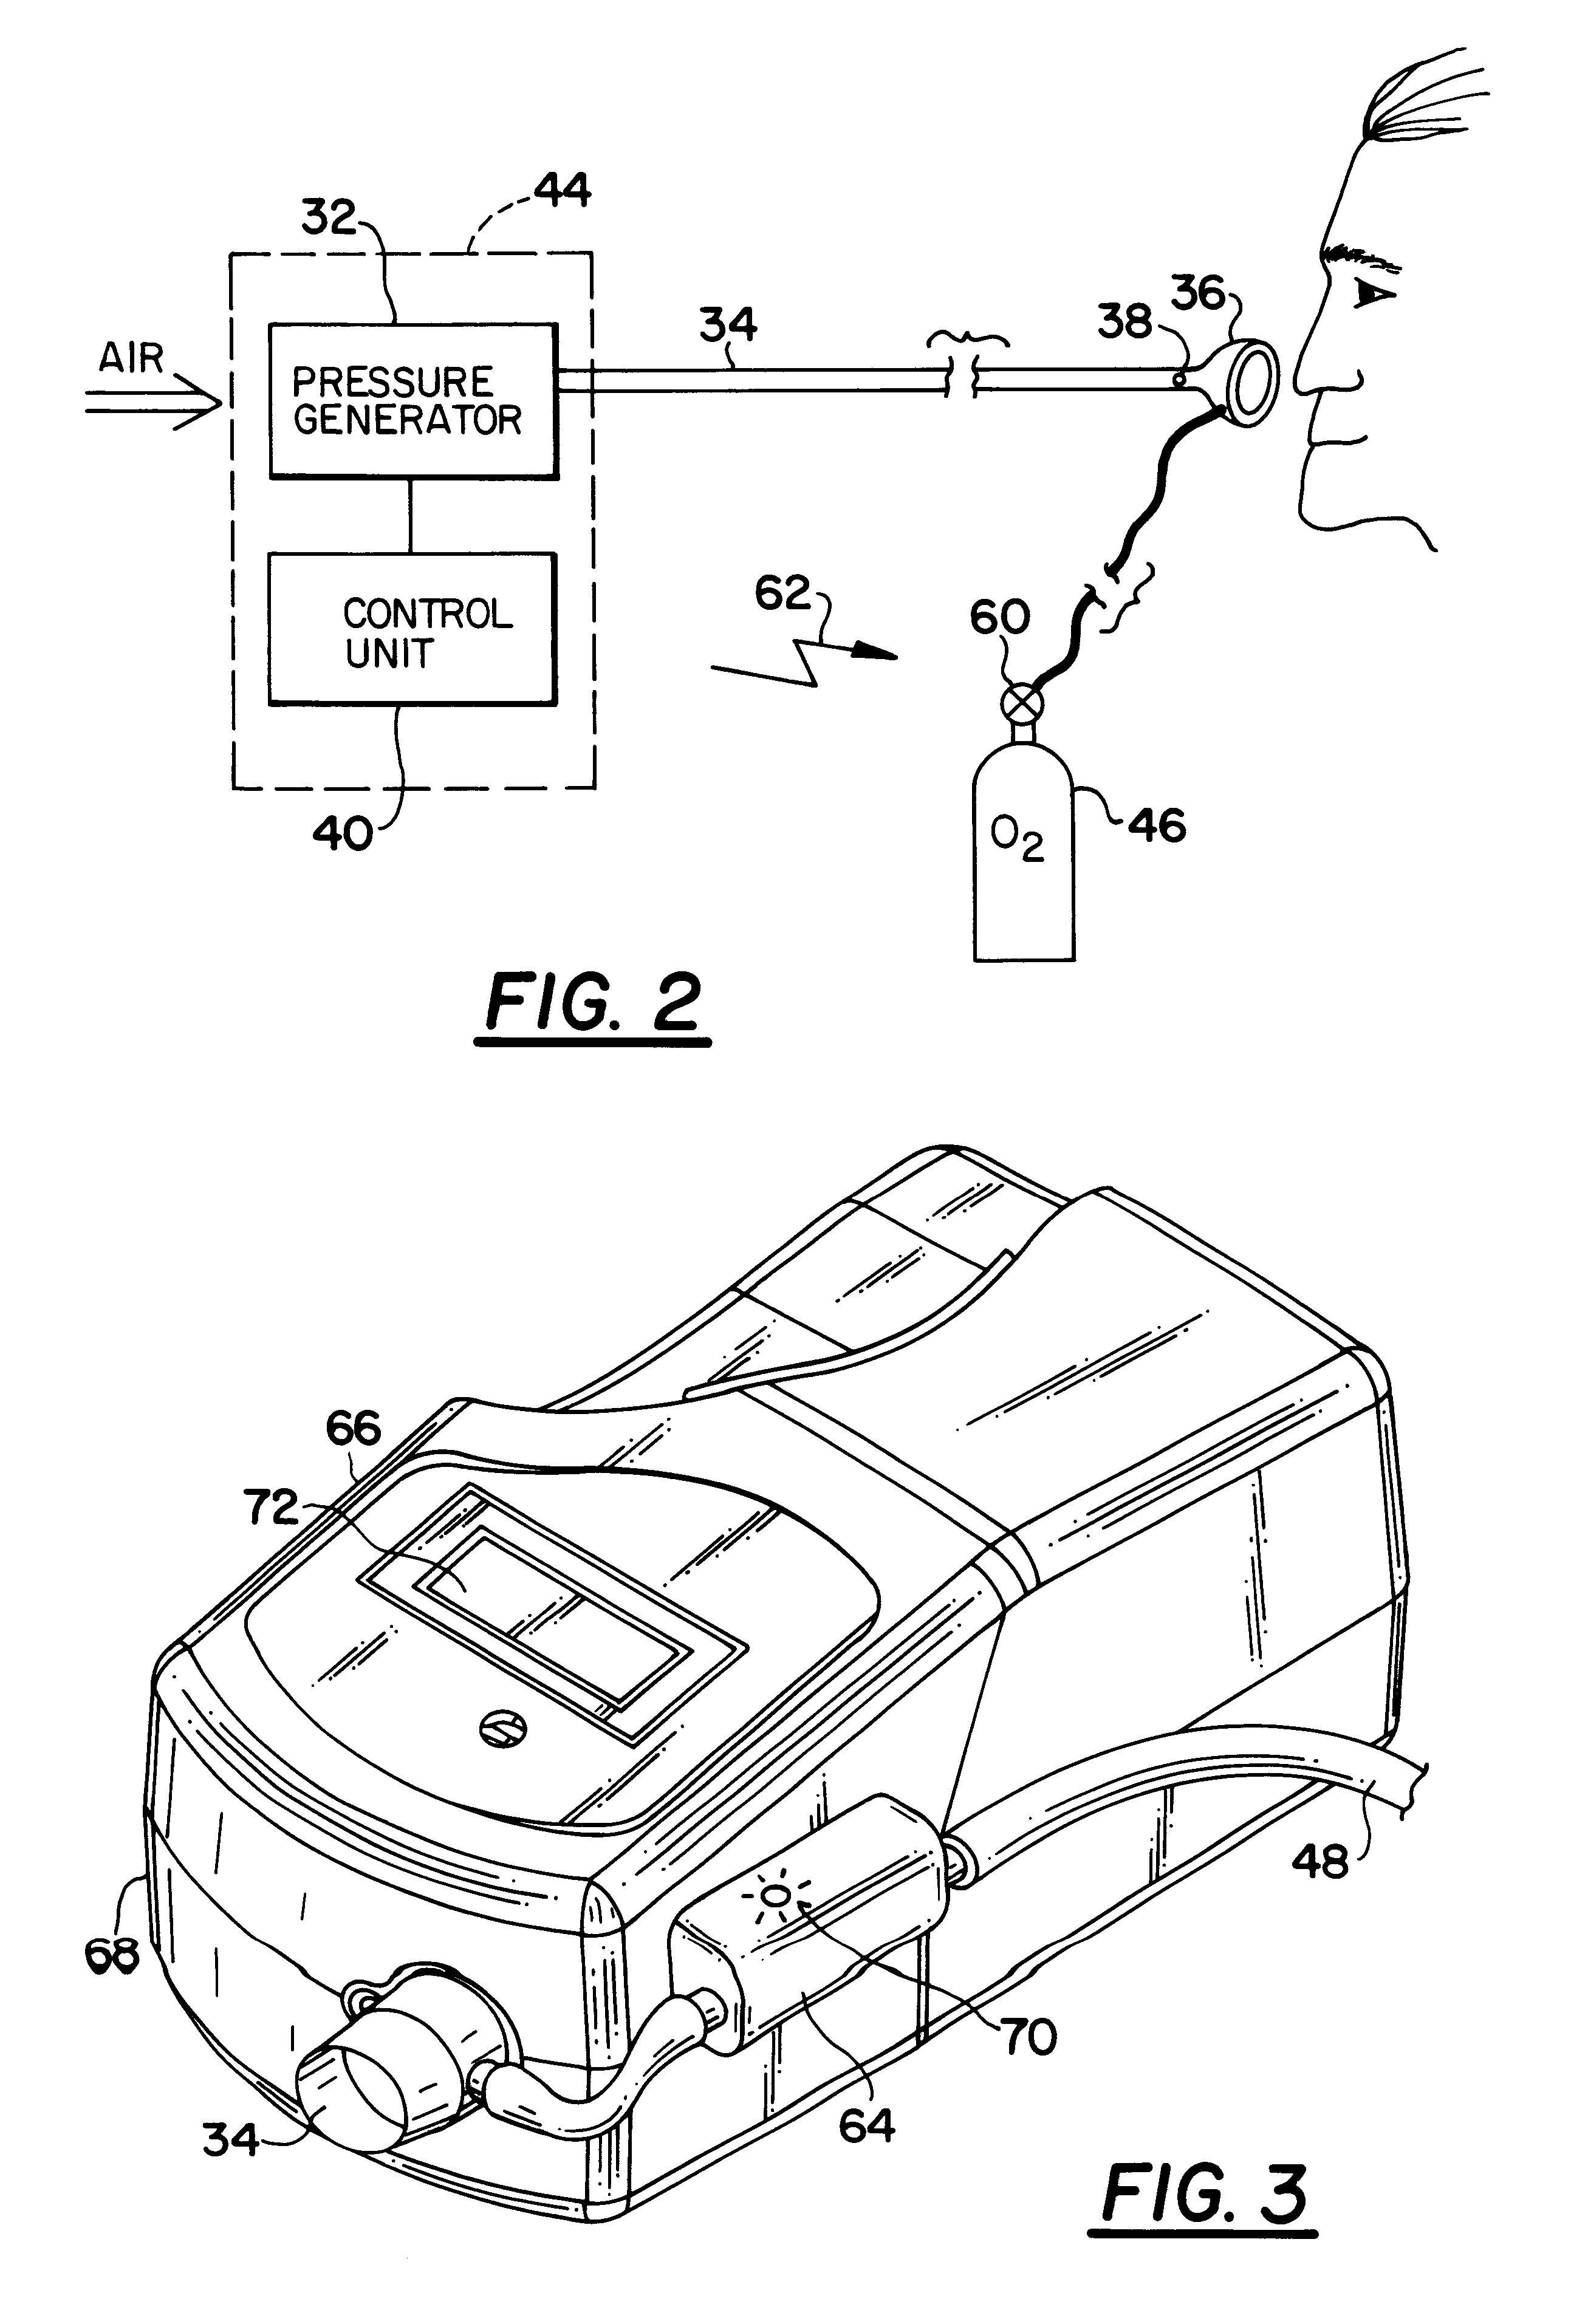 Pressure support system with a primary and a secondary gas flow and a method of using same